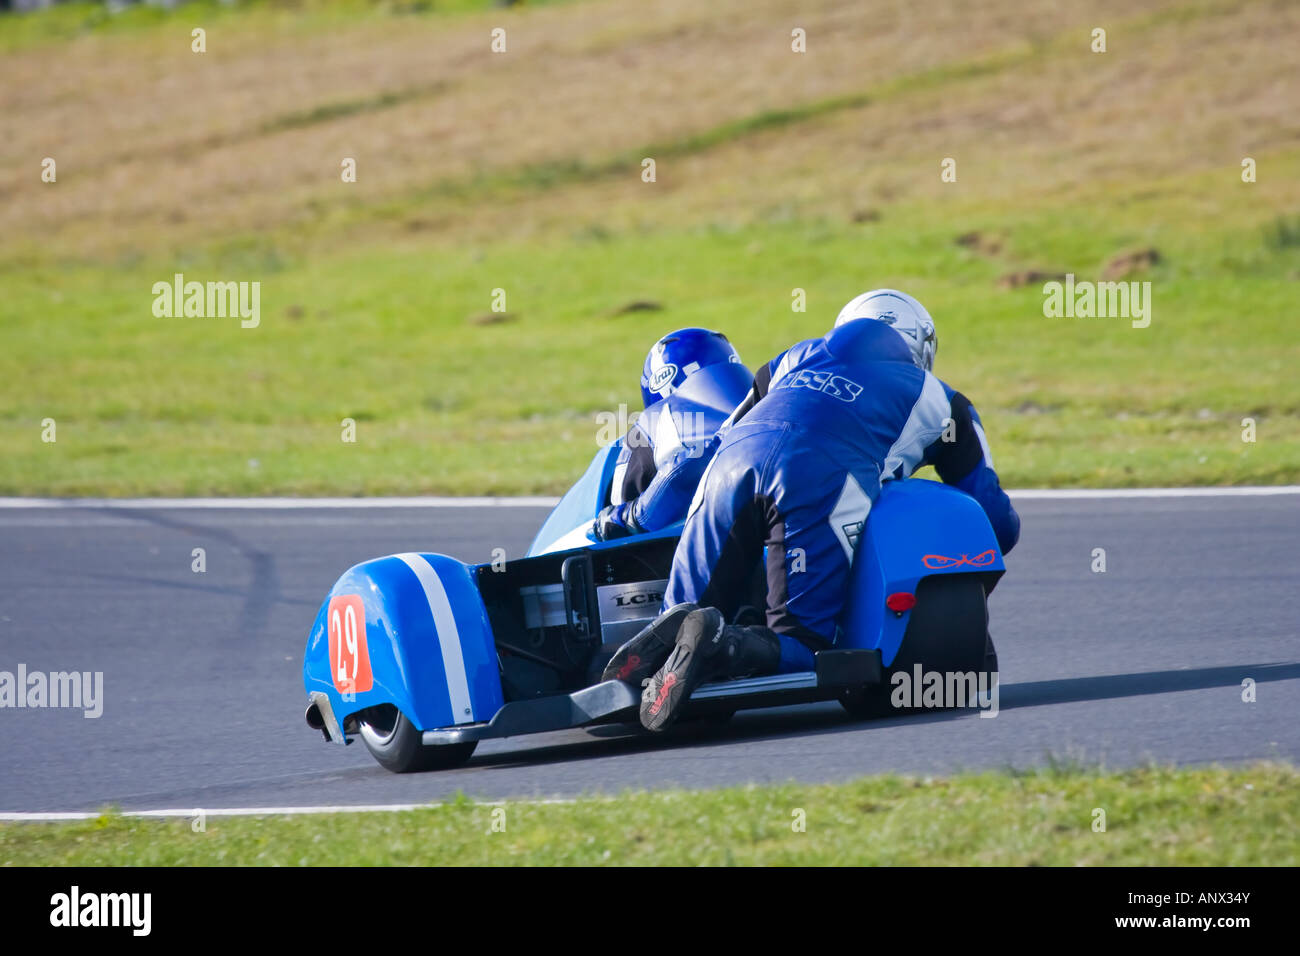 Motorcycle and sidecar racing at Knockhill circuit FIfe Scotland Stock Photo